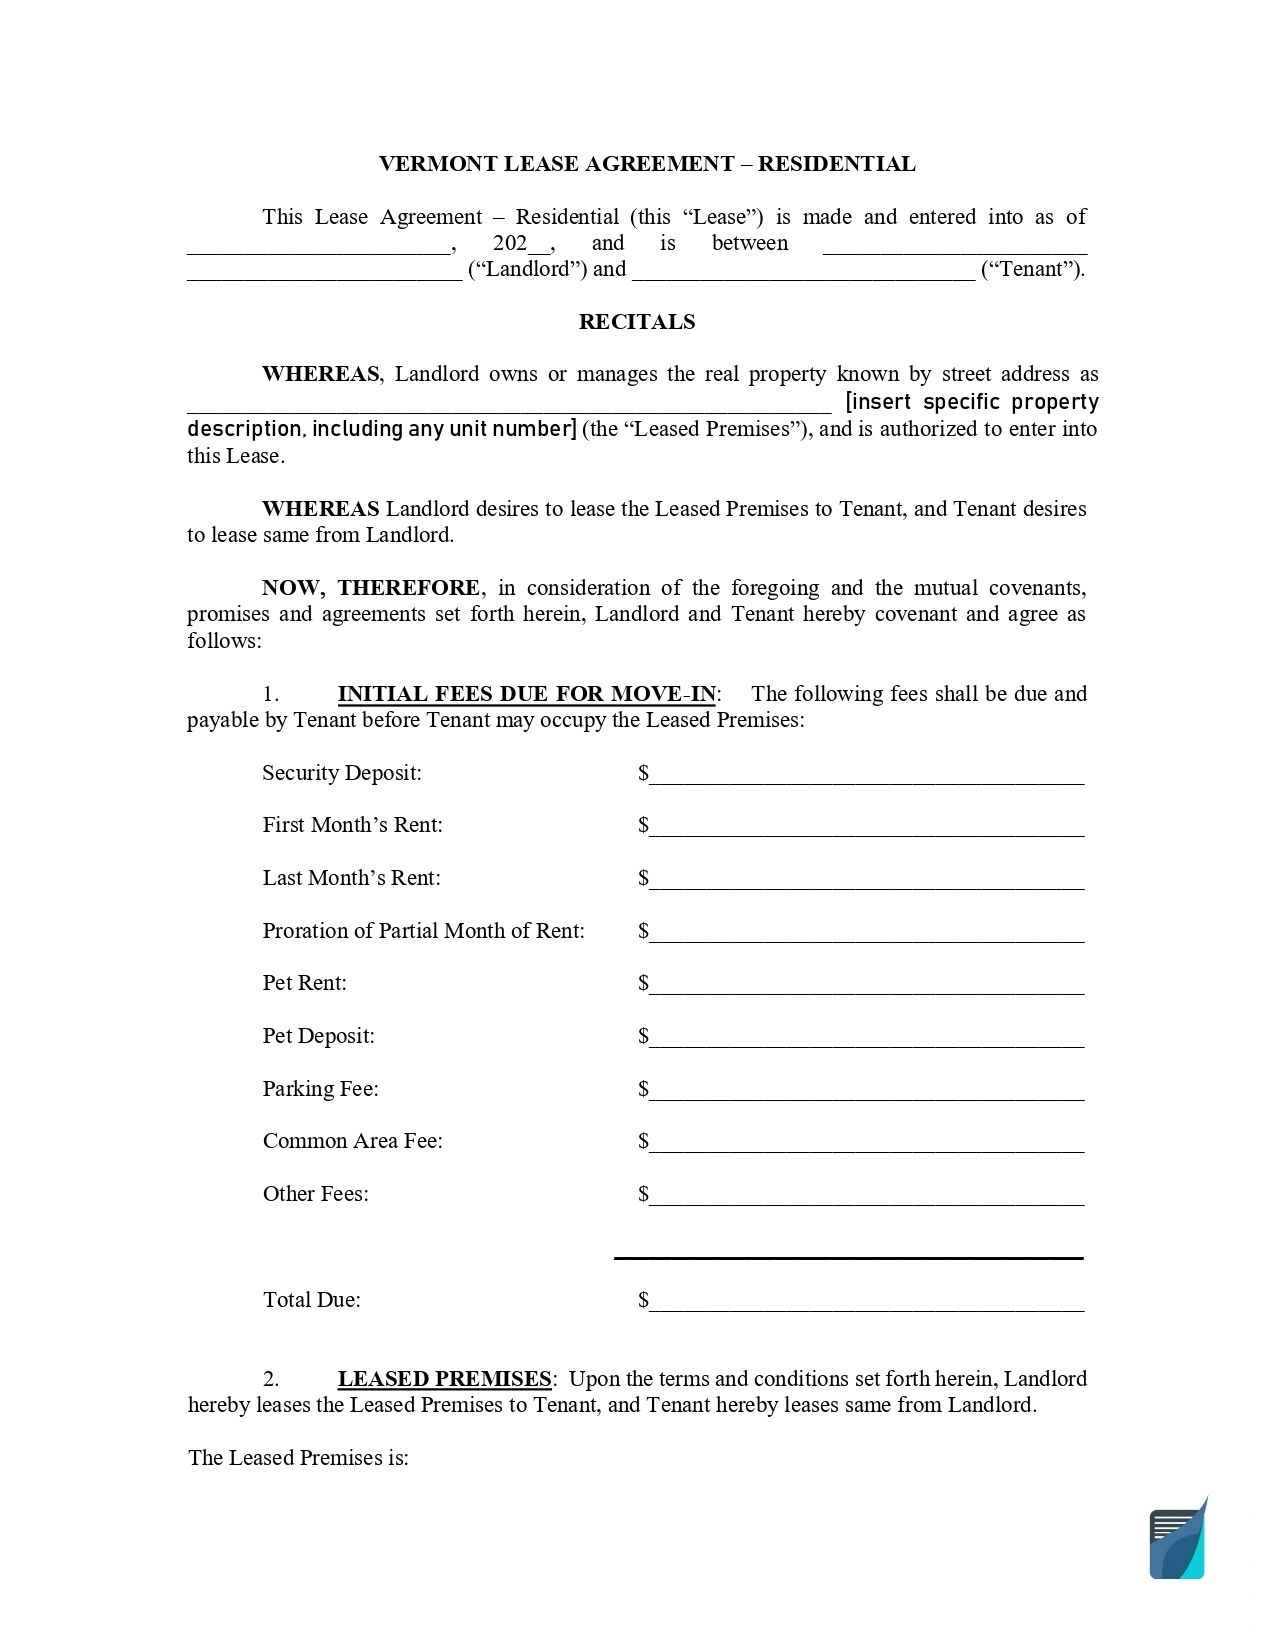 Vermont-Lease-Agreement-Residential-Form